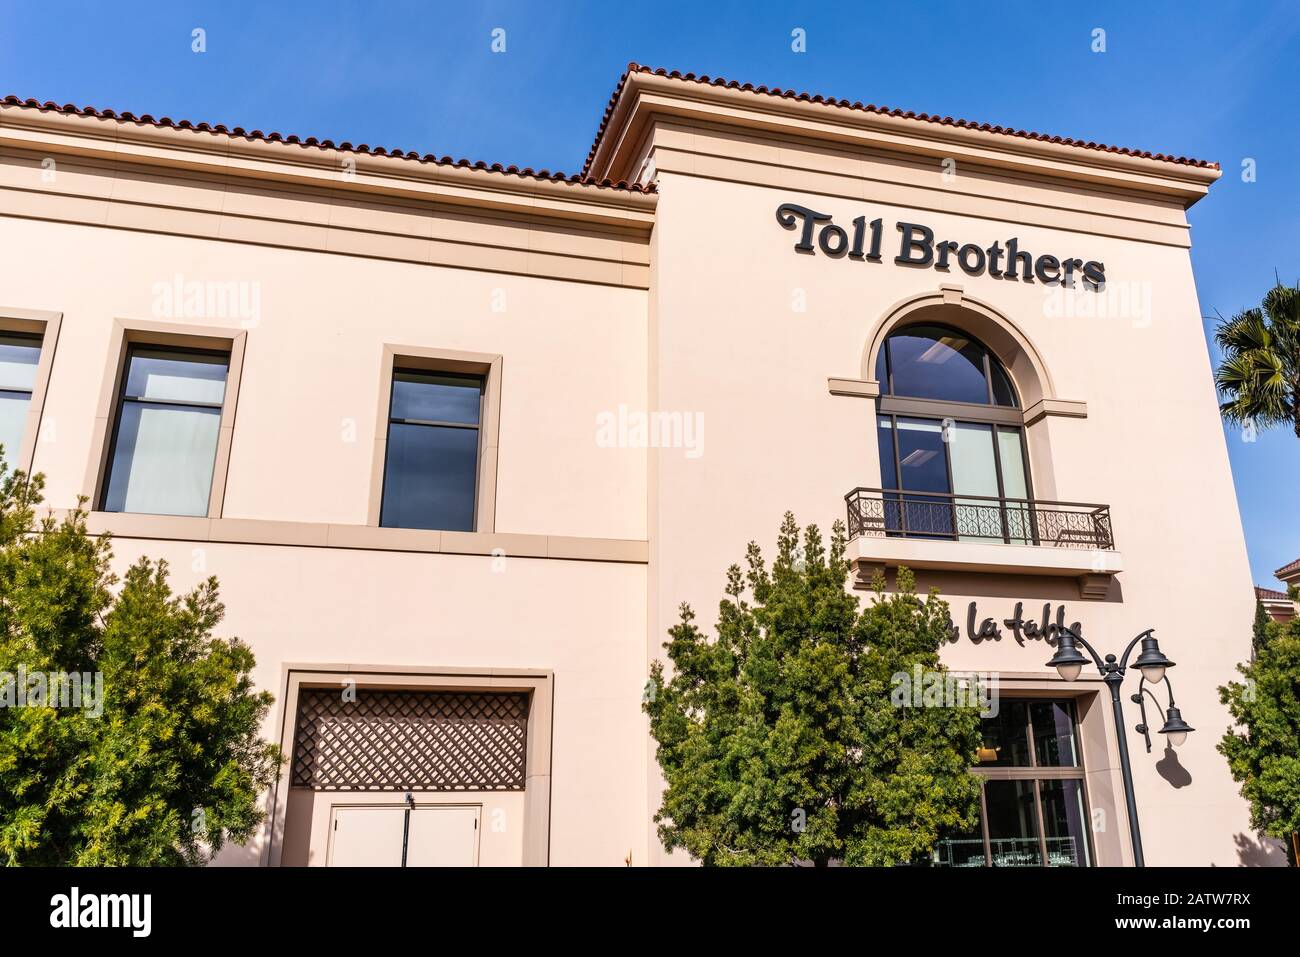 Feb 4, 2020 Santa Clara / CA / USA - Toll Brothers sale offices in Silicon Valley; Toll Brothers is a home construction company that specializes in bu Stock Photo